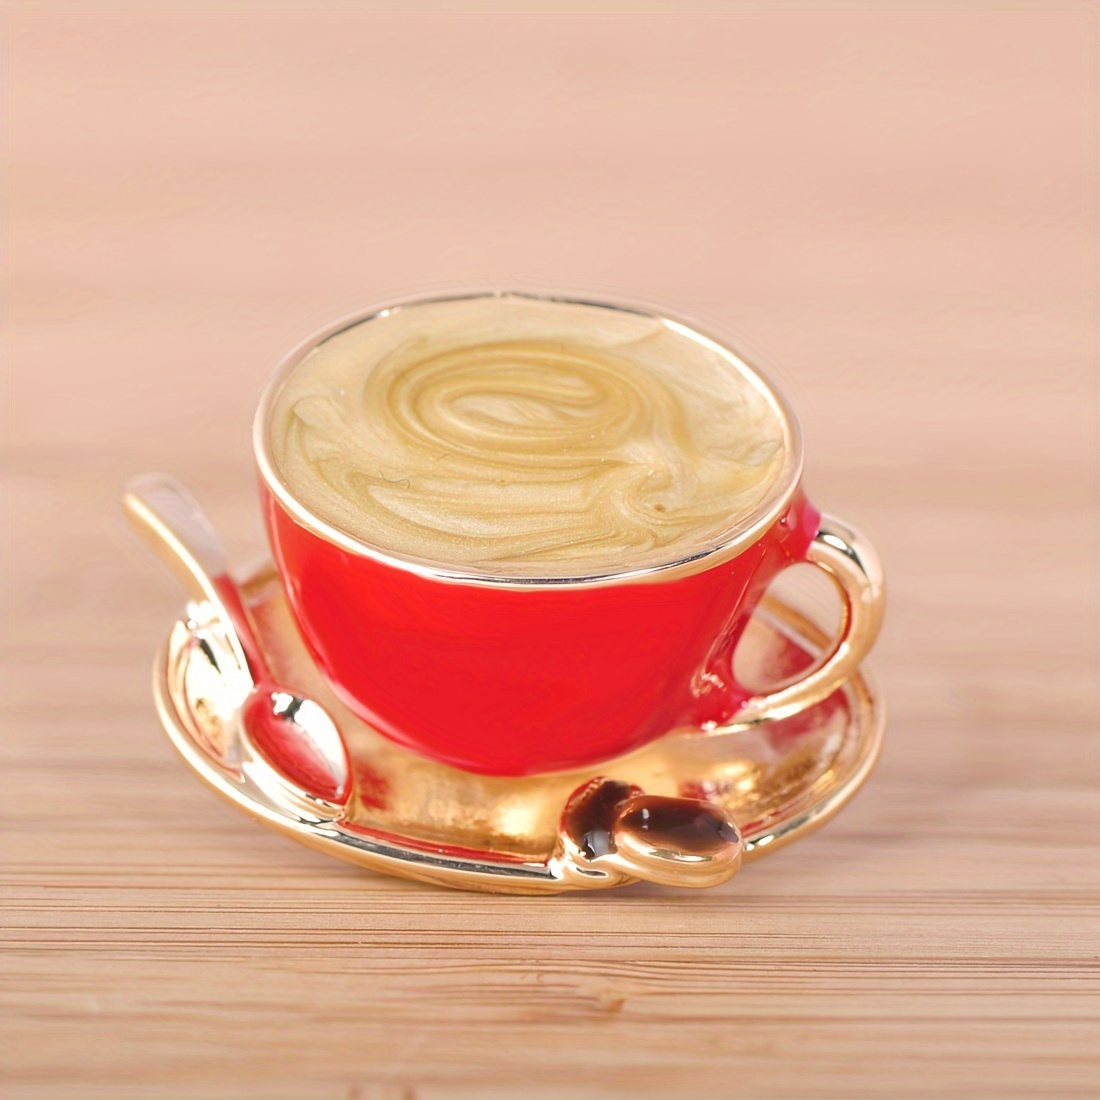 

1pc Coffee Cup Brooch Pin With Saucer And Spoon Design, Red Alloy With Golden Color Accents, Fashion Accessory For Coffee Lovers, Baristas And Researchers, Ideal For Daily Wear, Team Events, And Gifts